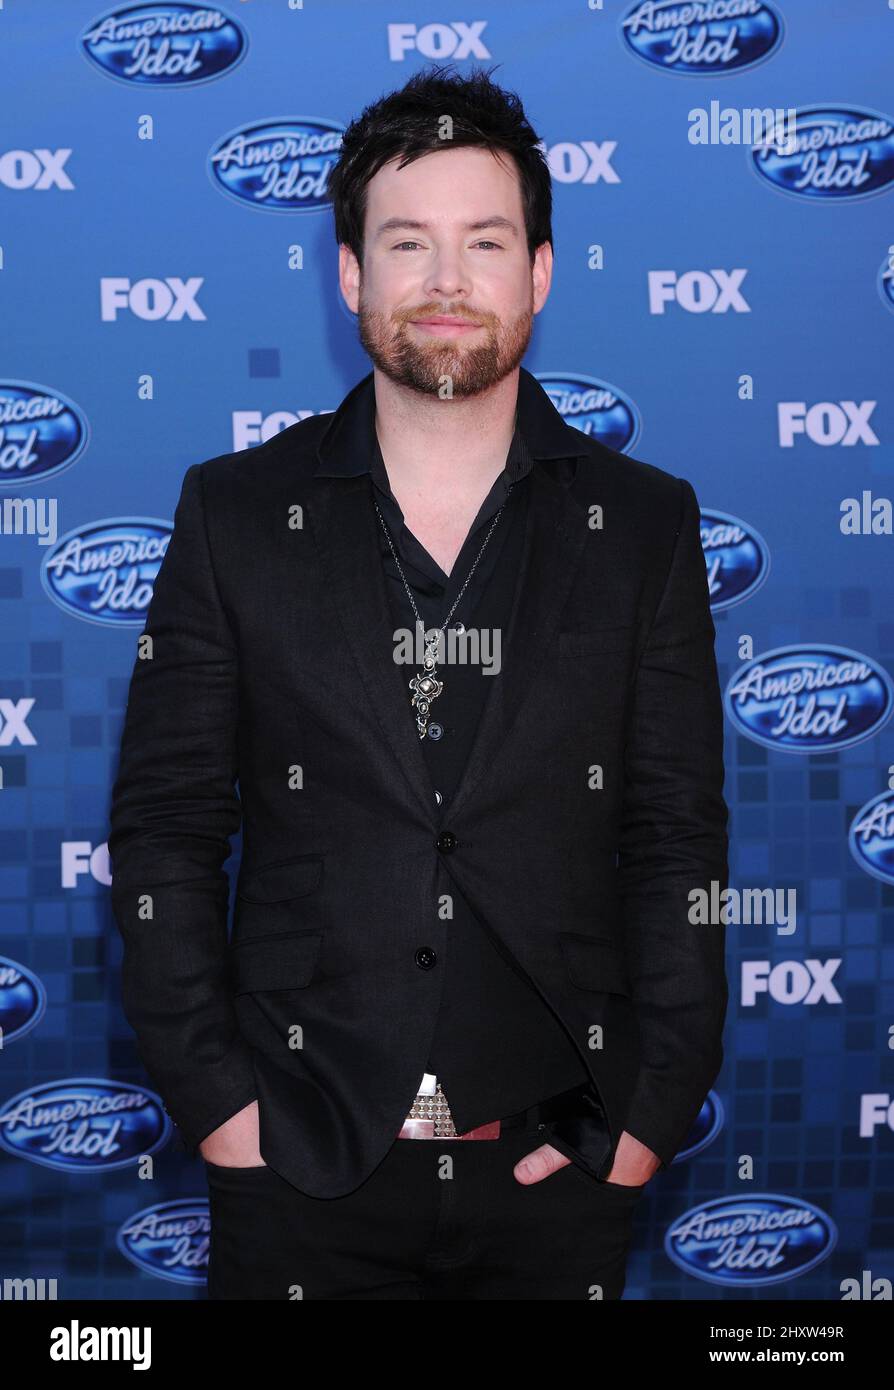 David Cook during the American Idol Grand Finale 2011 held at Nokia Theatre L.A. Live, California Stock Photo